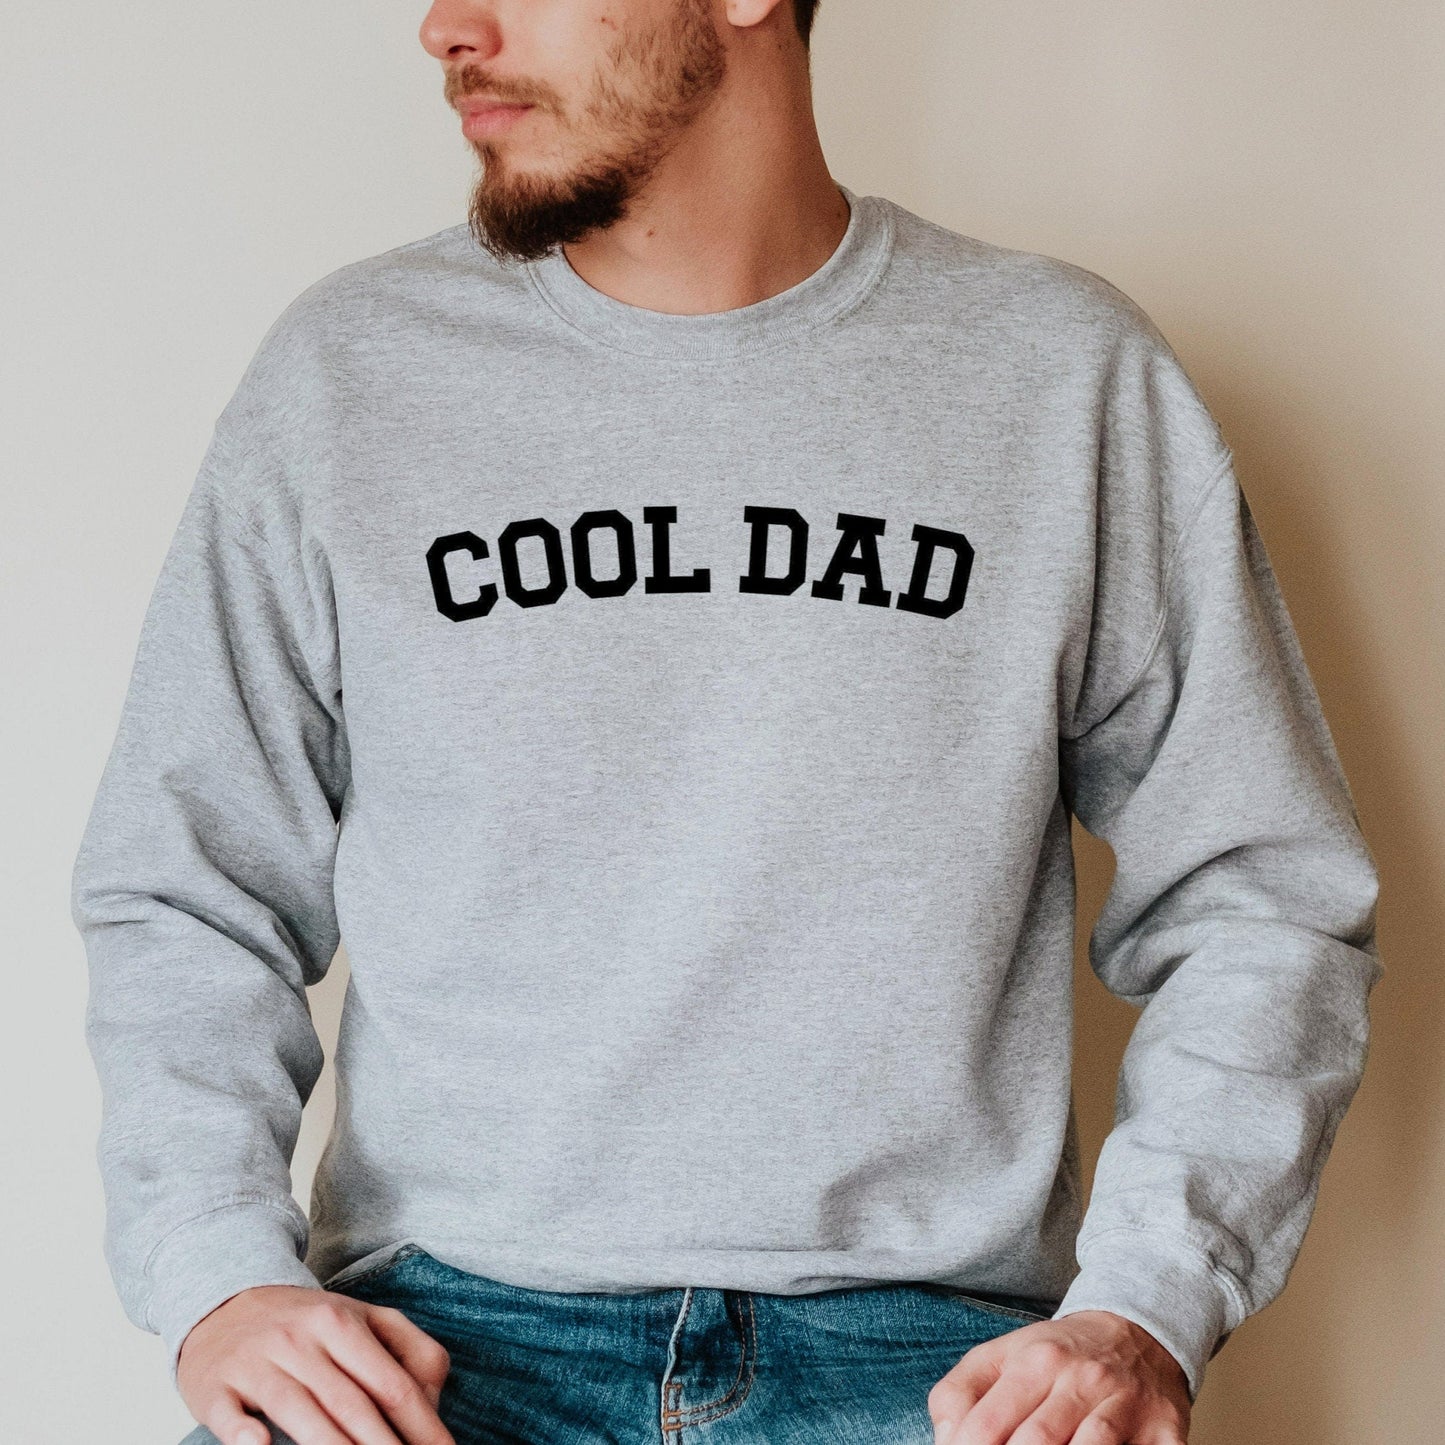 Cool Dad Crewneck Sweatshirt, Dad Shirt, Fathers Day Gift from Wife and Kids, Best Dad TShirt, New Dad Shirt